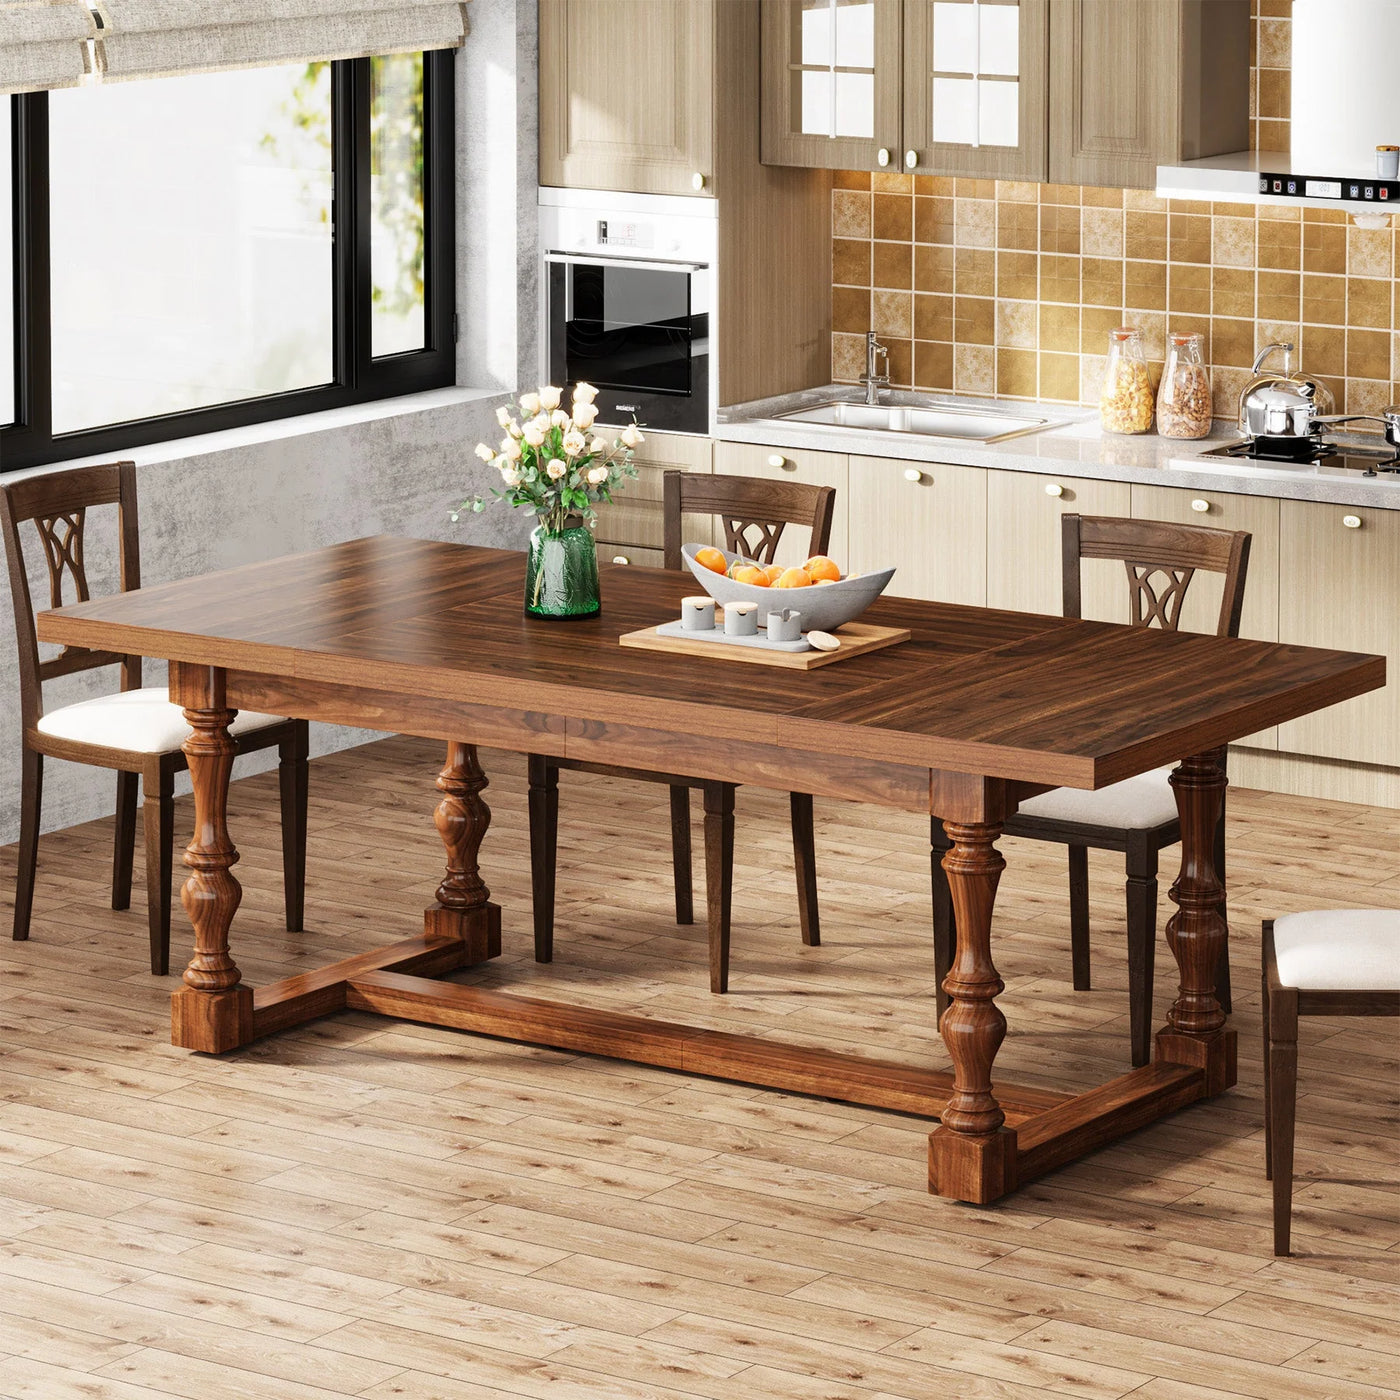 Belize Rectangular Dining Table Kitchen Table with Solid Wood Legs for 8 People